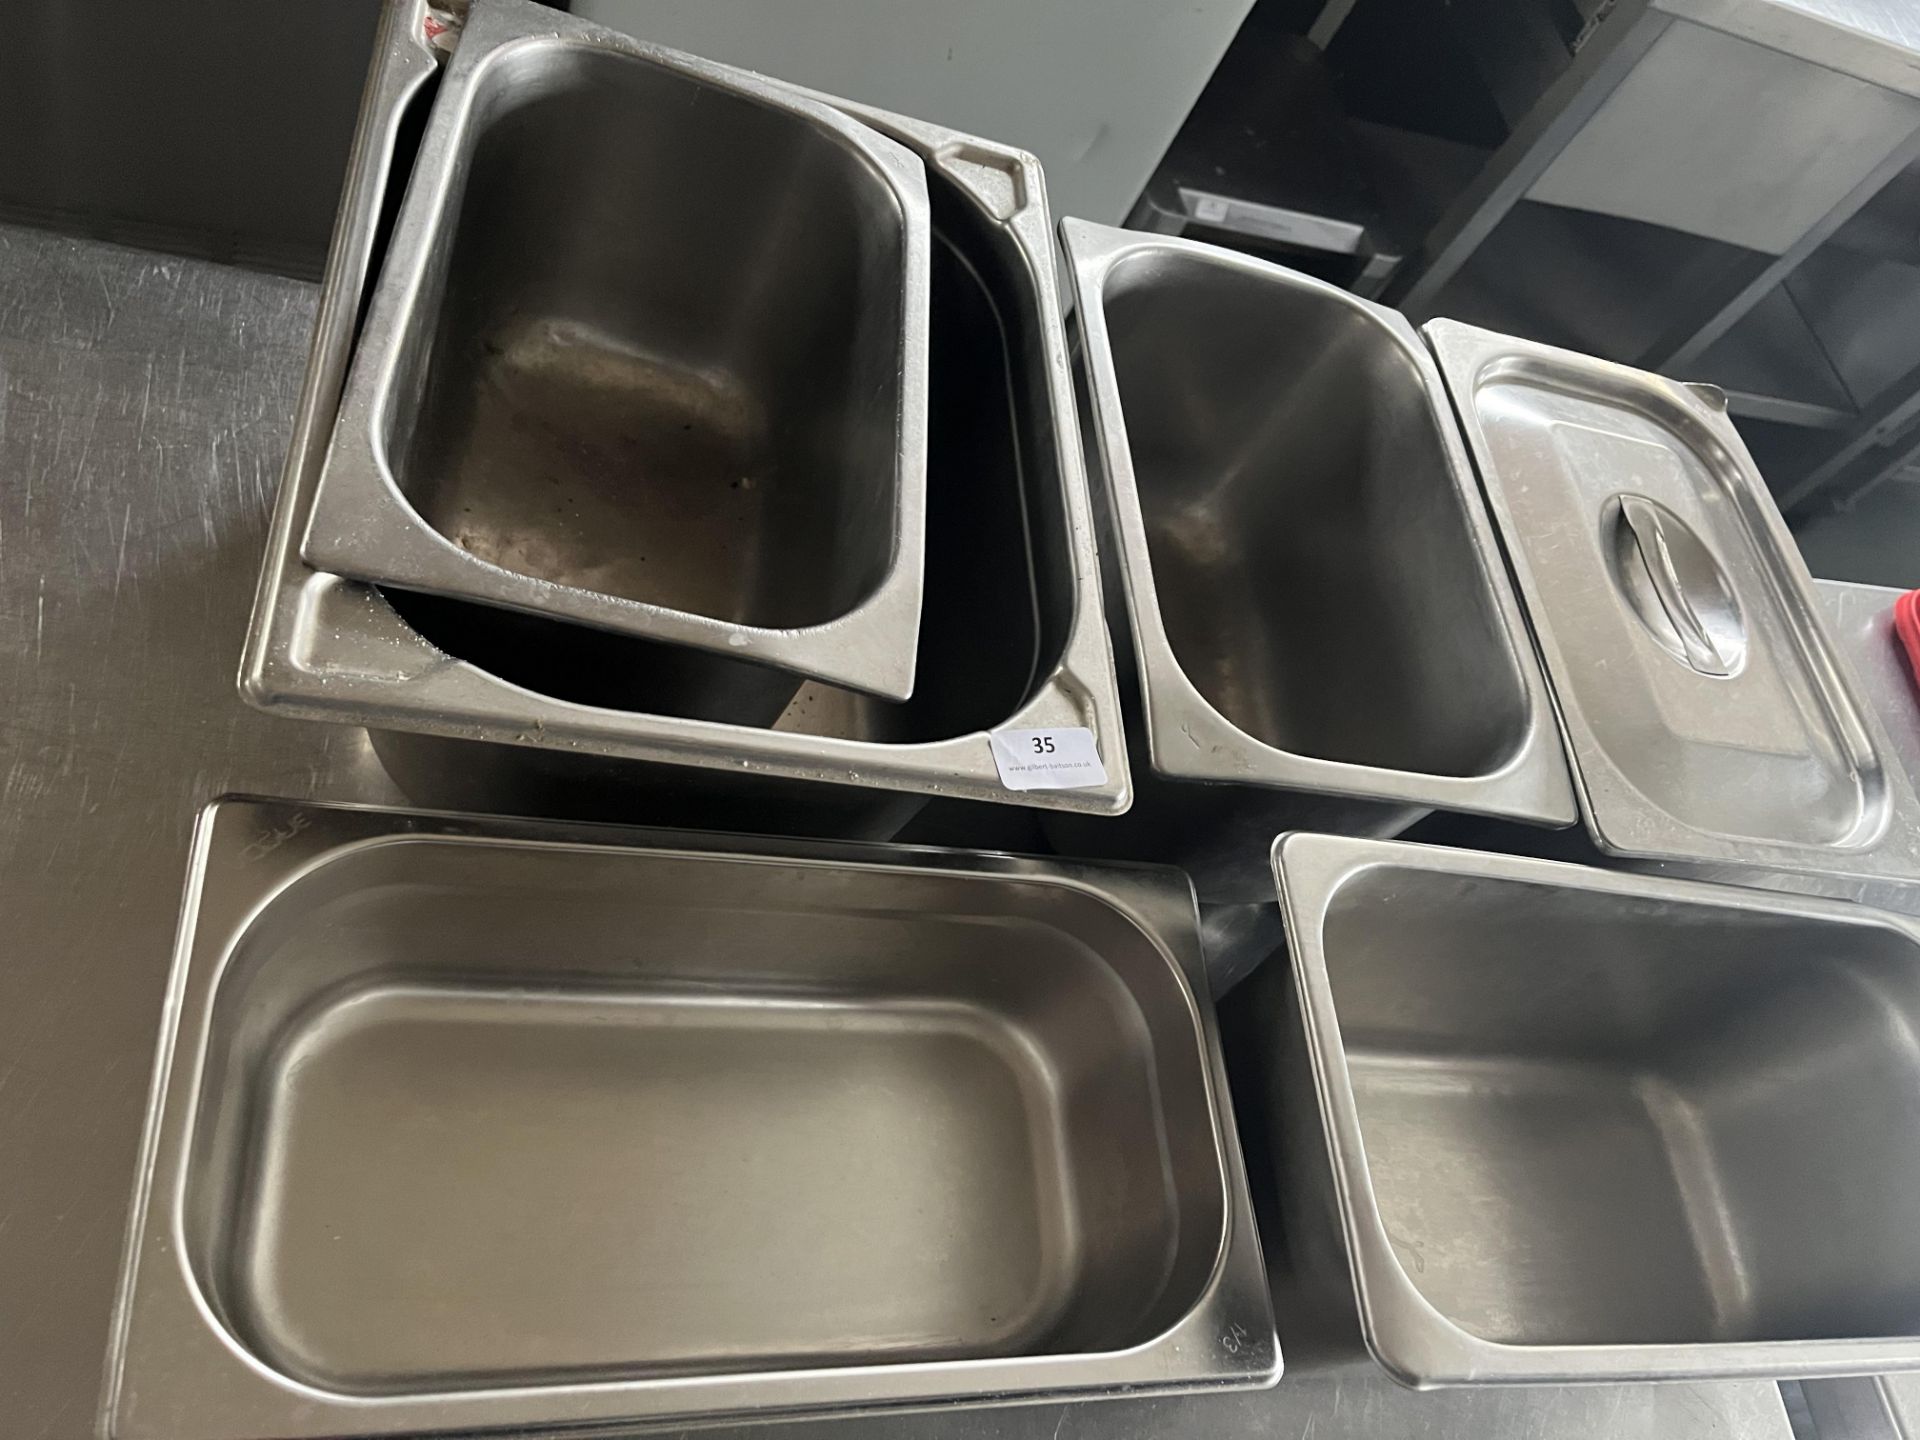 *Six Stainless Steel Bain Marie Inserts